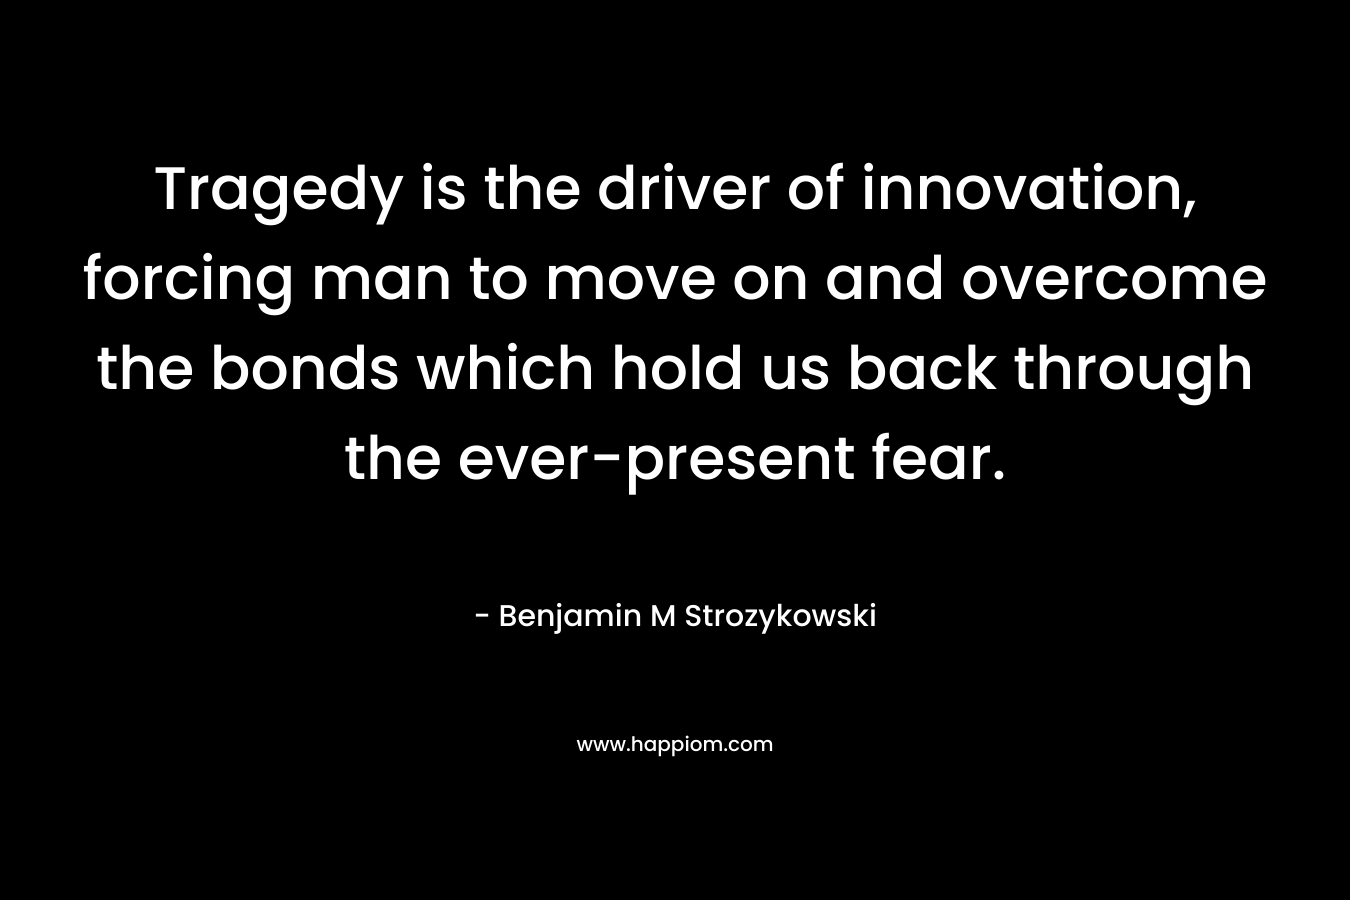 Tragedy is the driver of innovation, forcing man to move on and overcome the bonds which hold us back through the ever-present fear. – Benjamin M Strozykowski